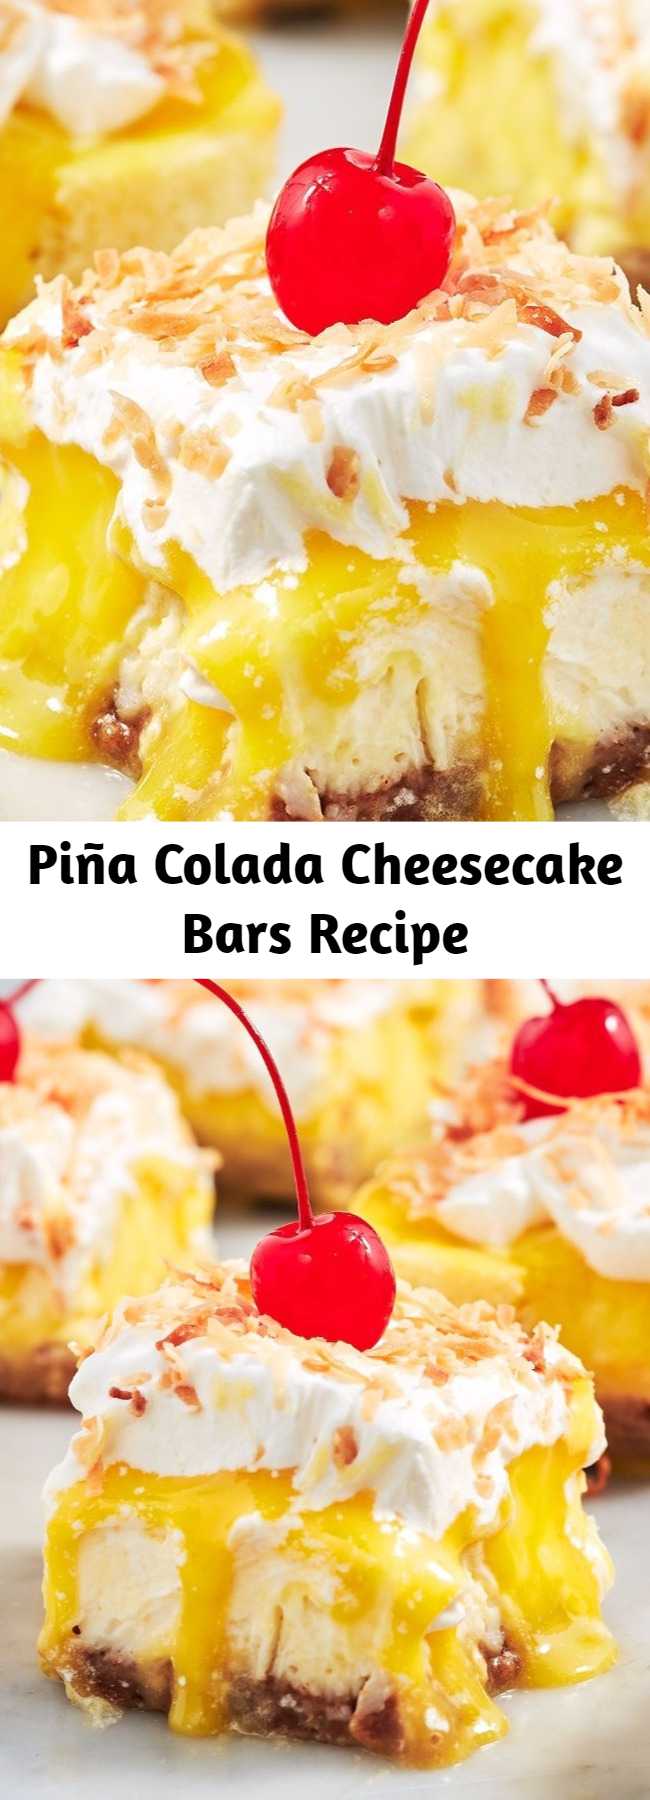 The pineapple curd on these bars is TOO good. One bite will transport you to the beach, piña colada in hand. 😎